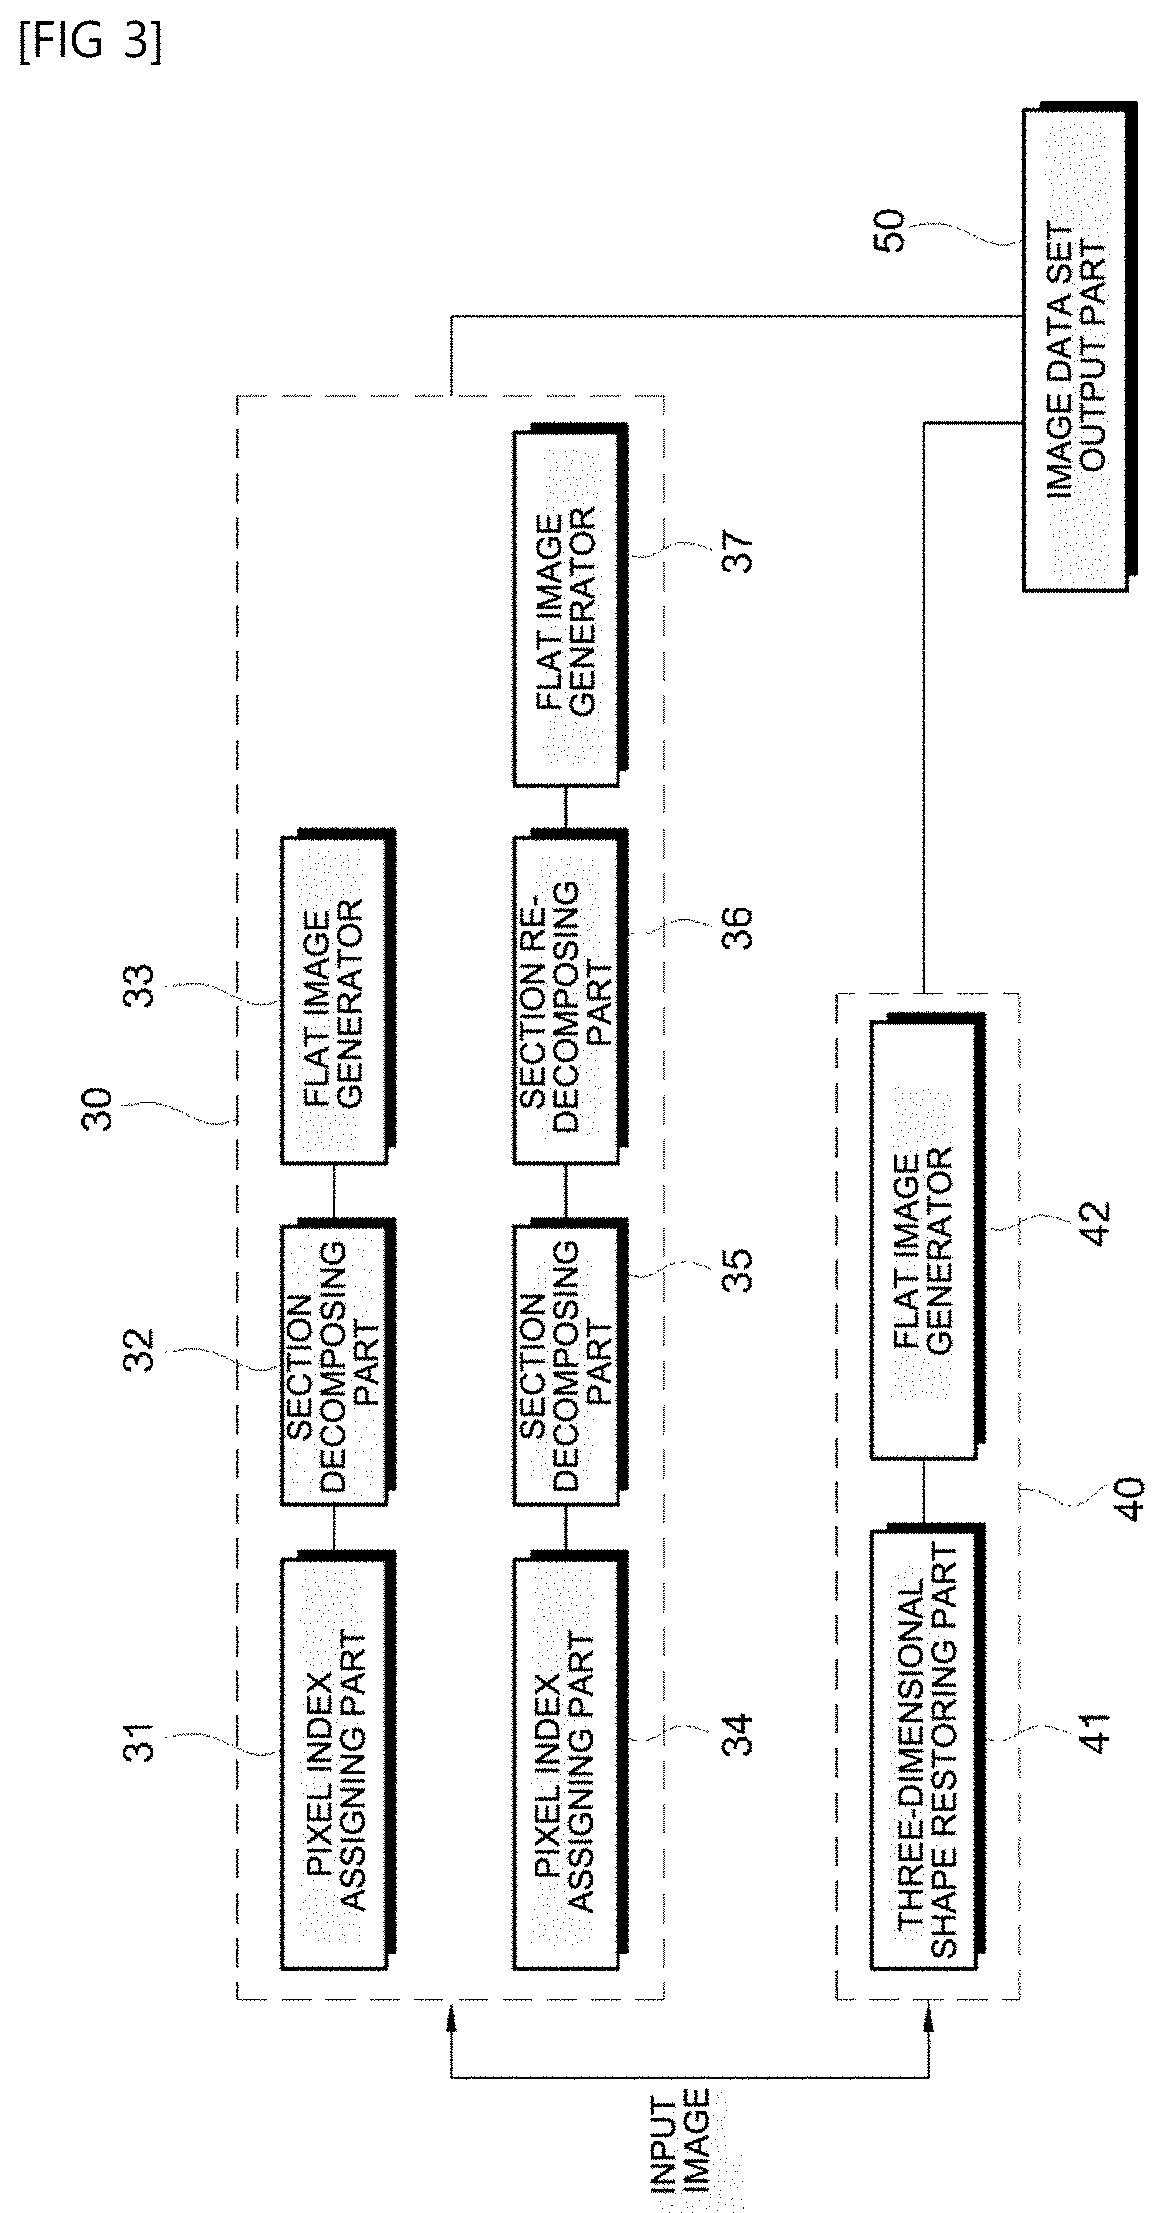 Apparatus and method for removing distortion of fisheye lens and omni-directional images